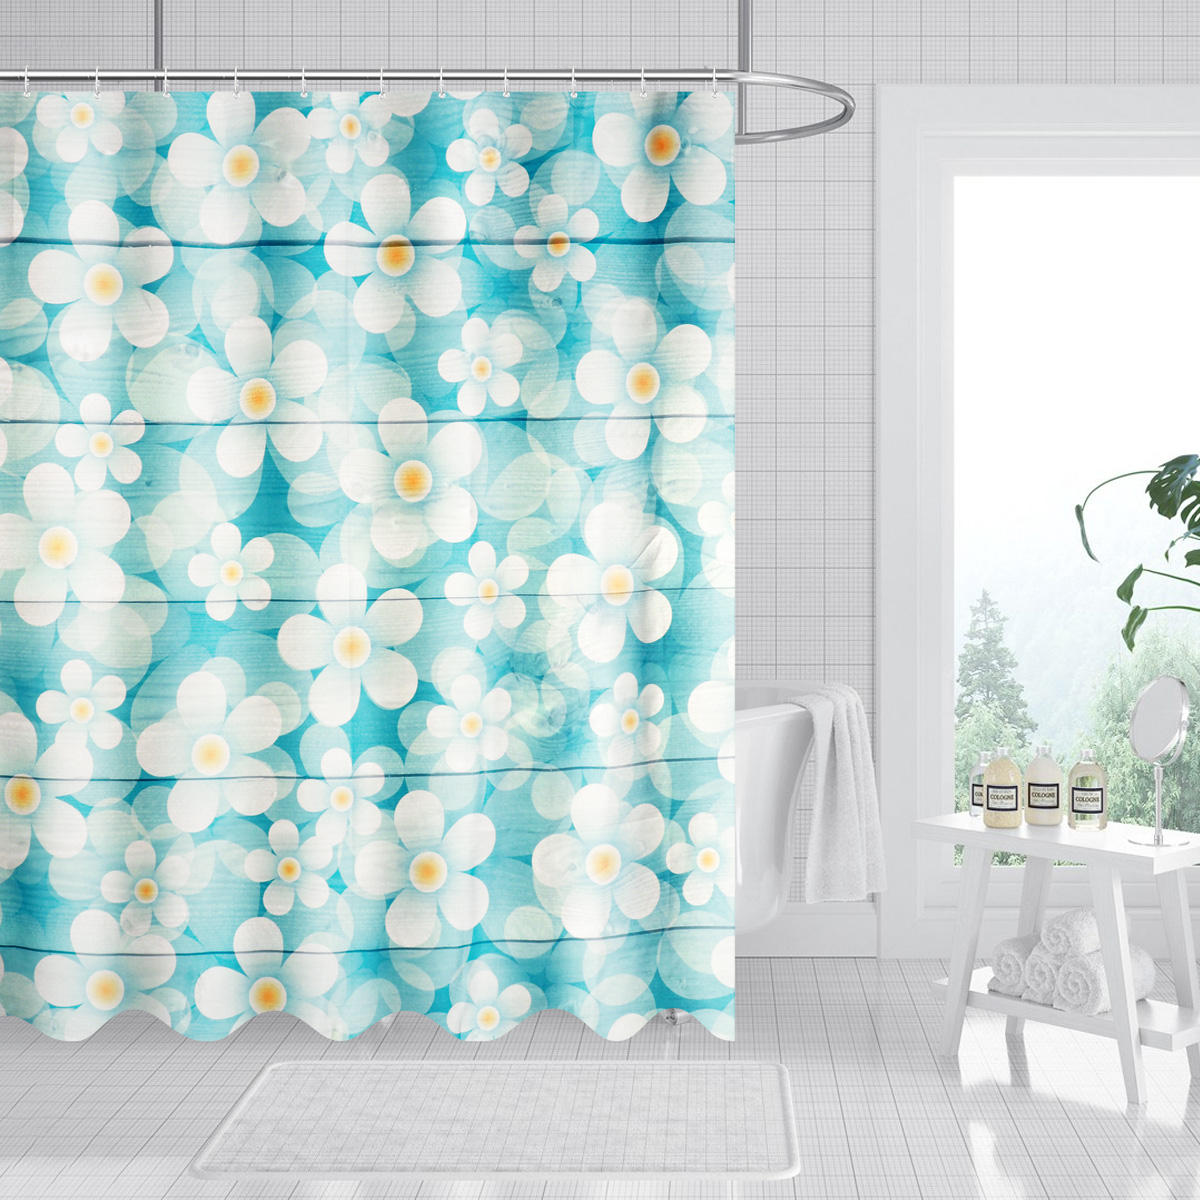 Freehand-Small-Flower-Shower-Curtain-Set-Wear-resistant-Toilet-Seat-Cushion-Toilet-Lid-Cover-Bath-Ma-1925461-3